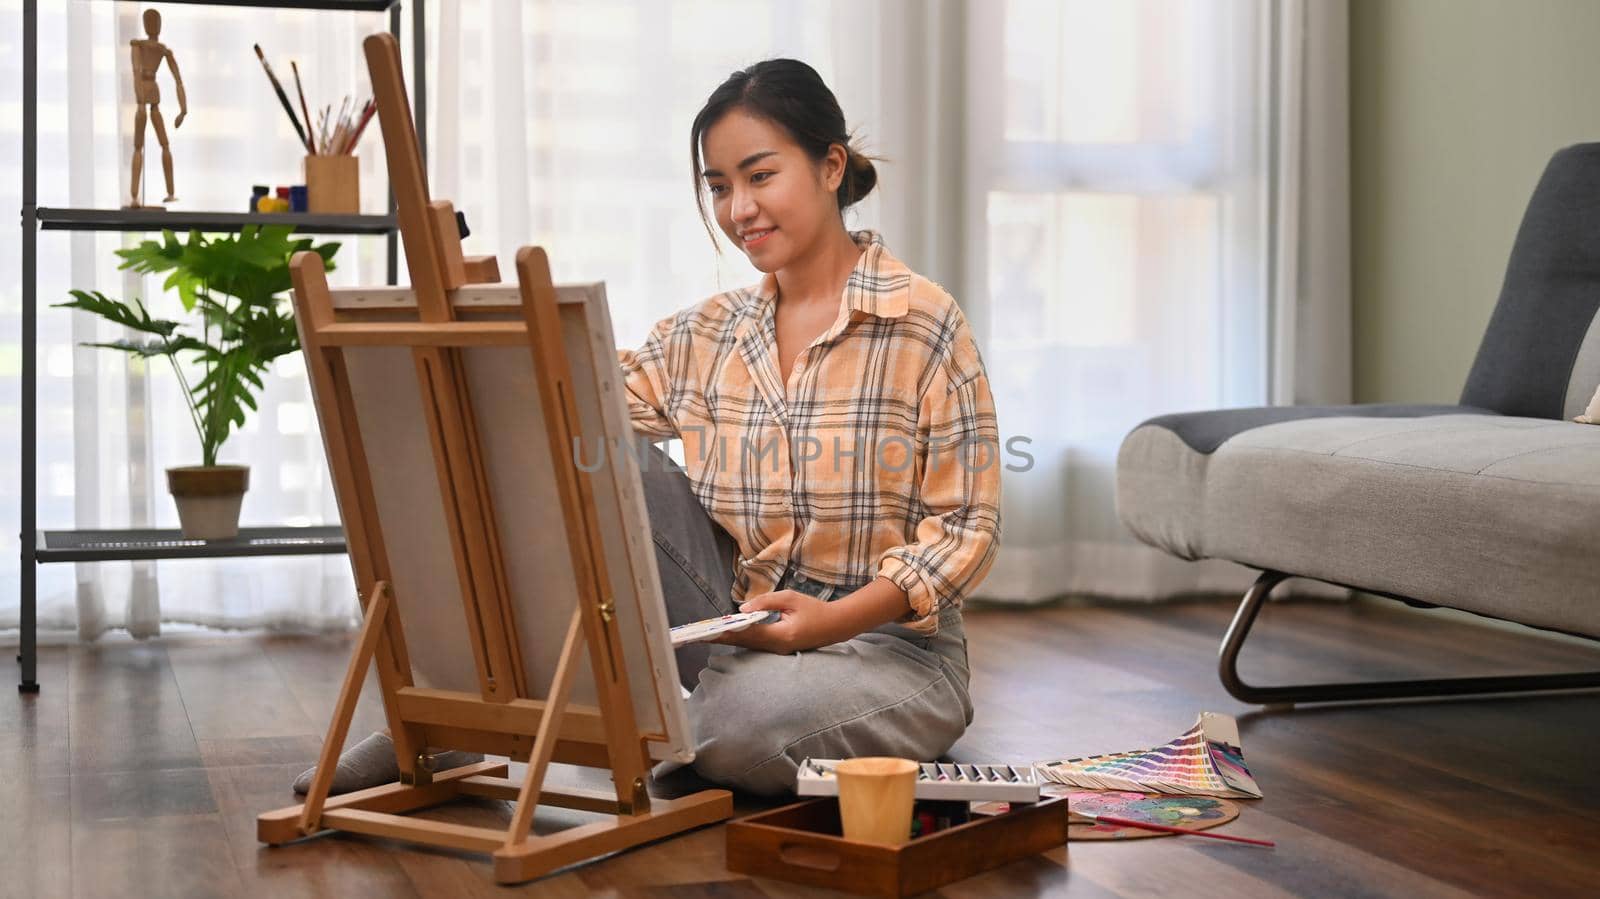 Pleasant female artist sitting on floor in bright living room and painting with watercolor on canvas. Art and leisure activity concept.